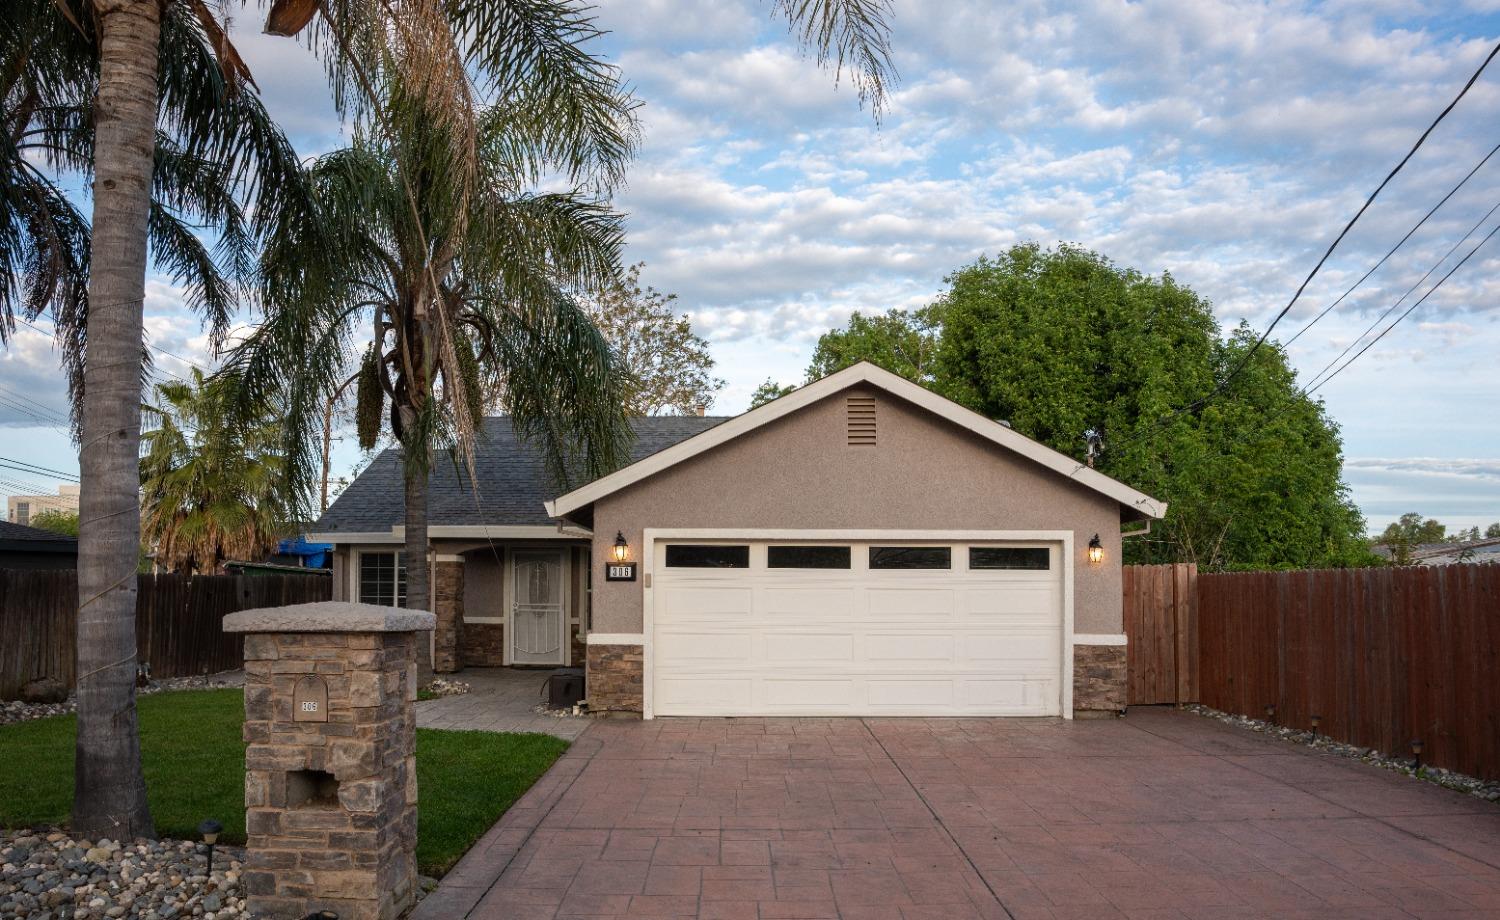 Photo of 306 B St in Woodland, CA